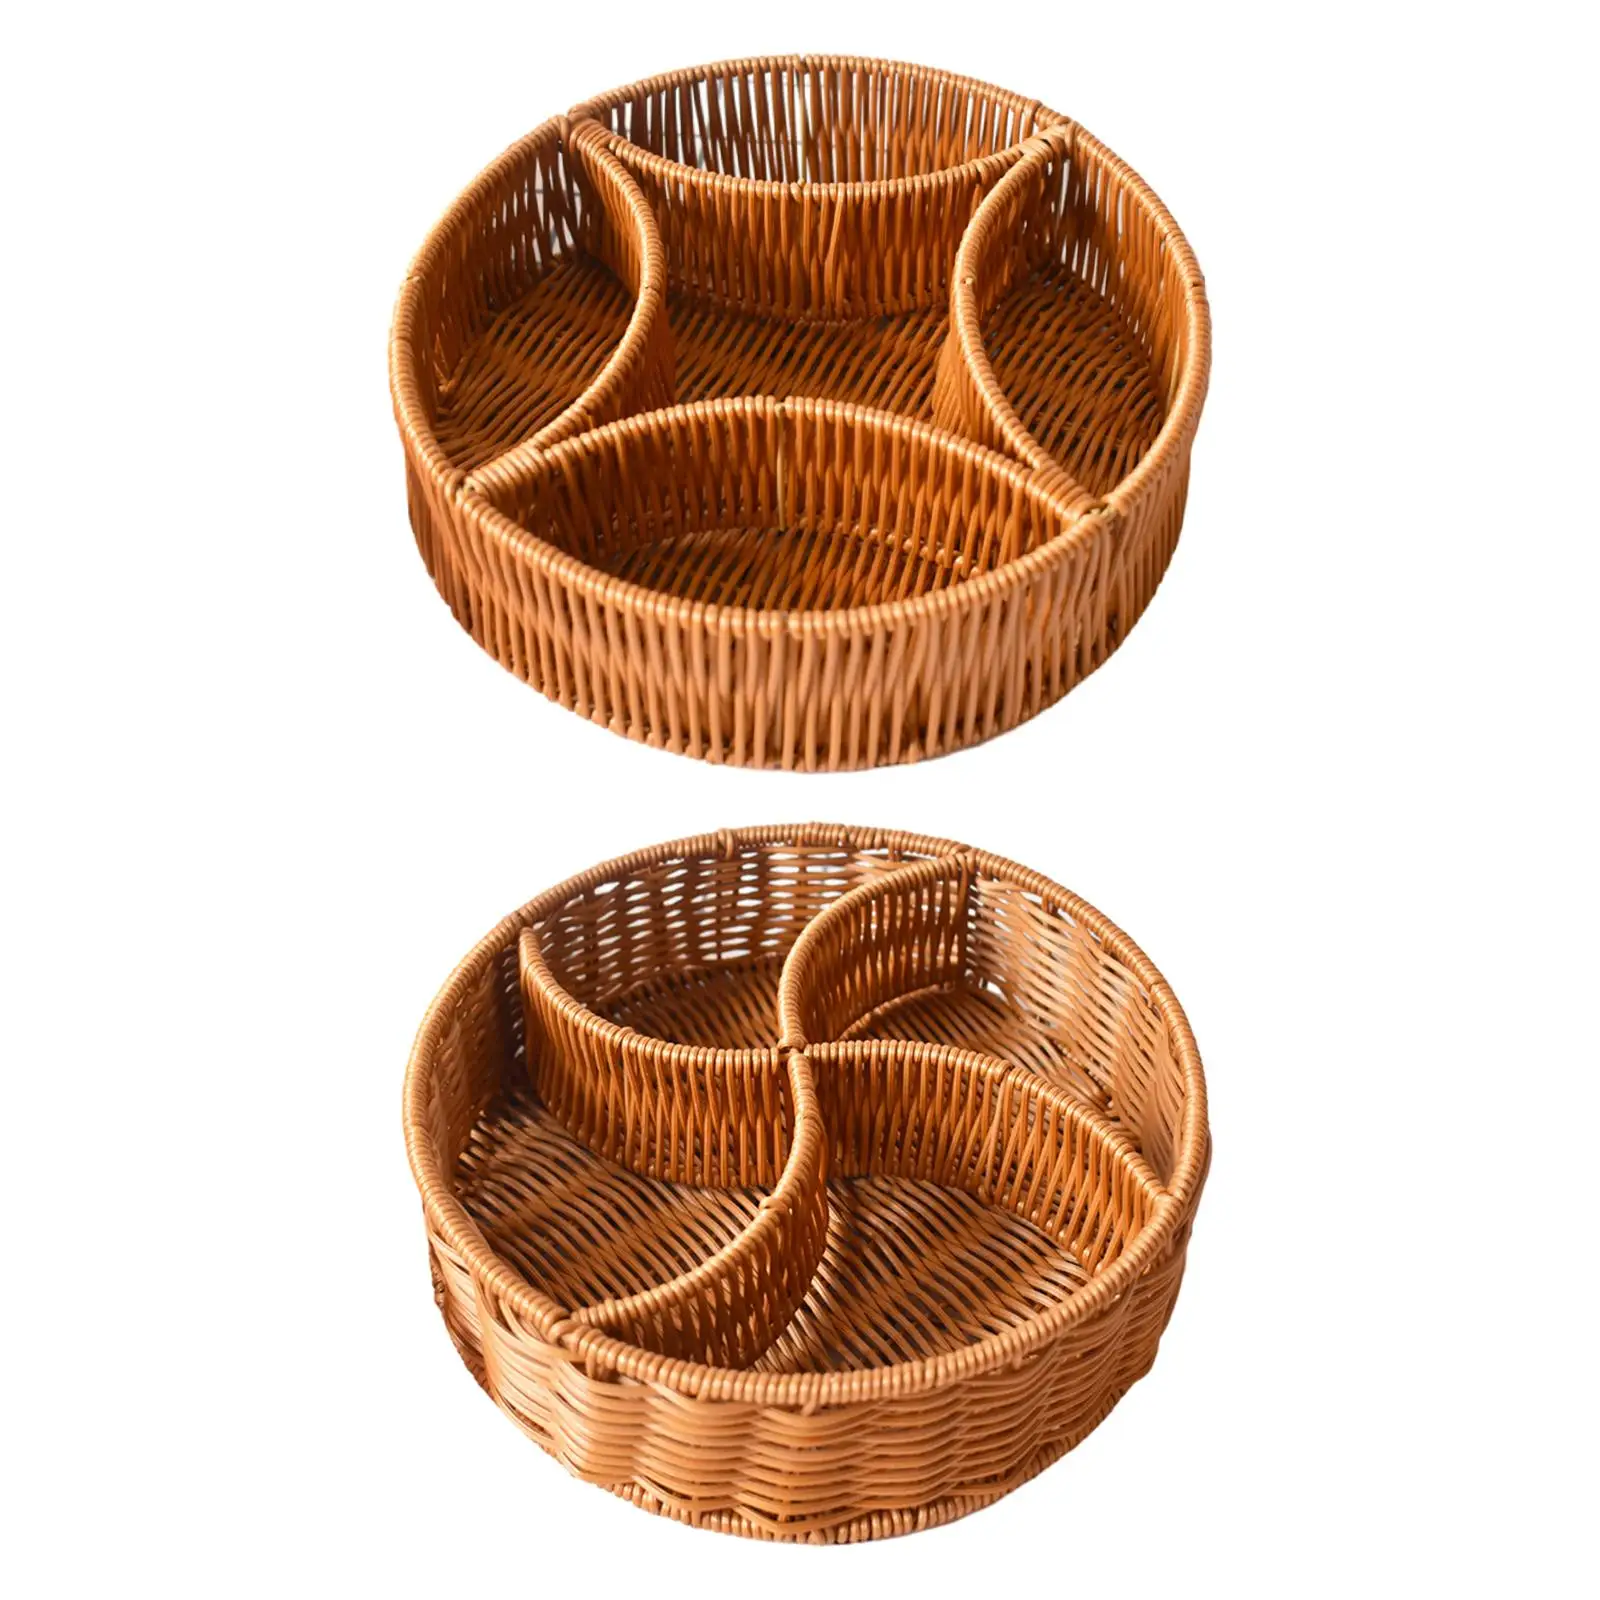 Woven Serving Basket Rustic Dividers Candy Serving Tray Home Décor Organizer Handmade for Home Dining Wedding Gift Pantry Kitchen